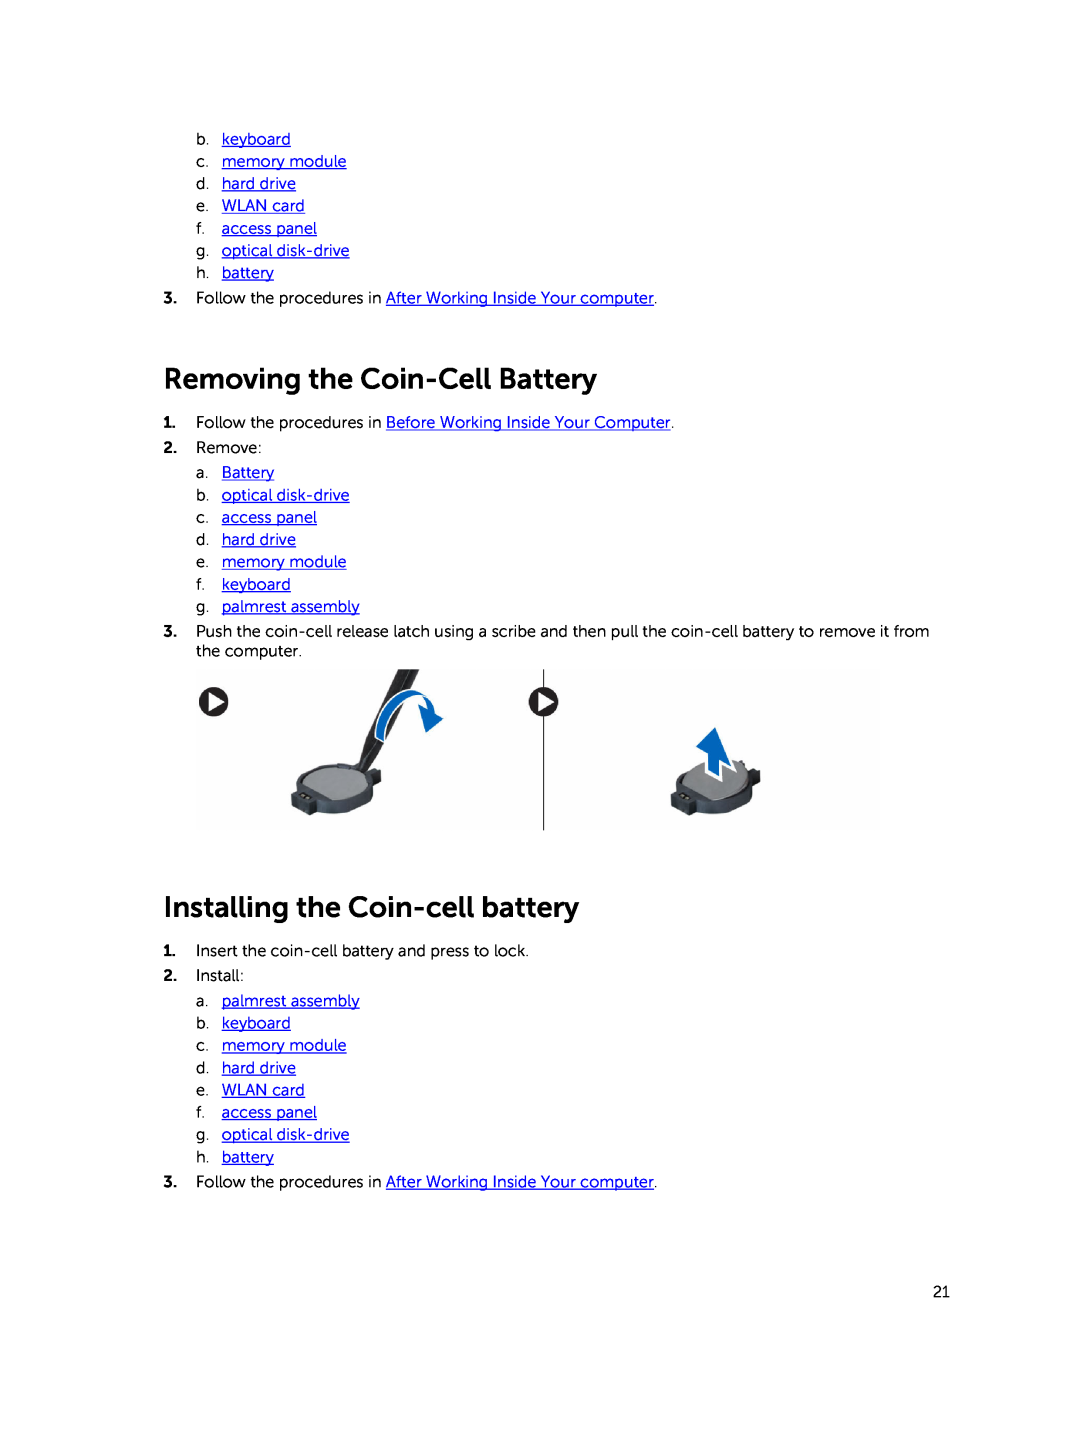 Dell P45F001 owner manual Removing the Coin-Cell Battery, Installing the Coin-cell battery, Remove 